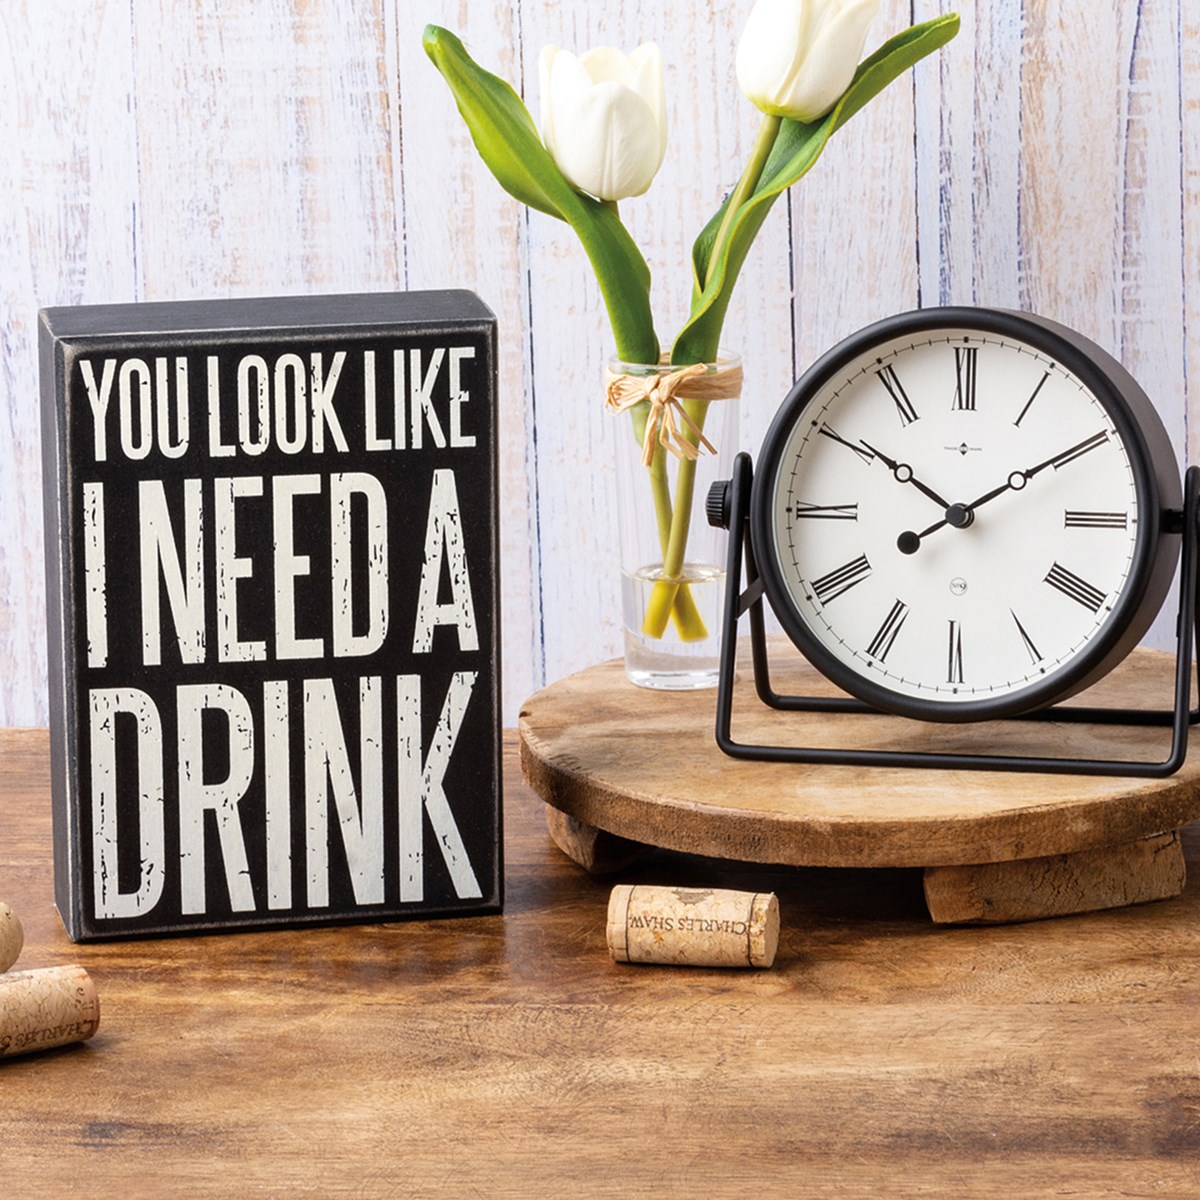 You Look Like I Need A Drink Box Sign - Wood